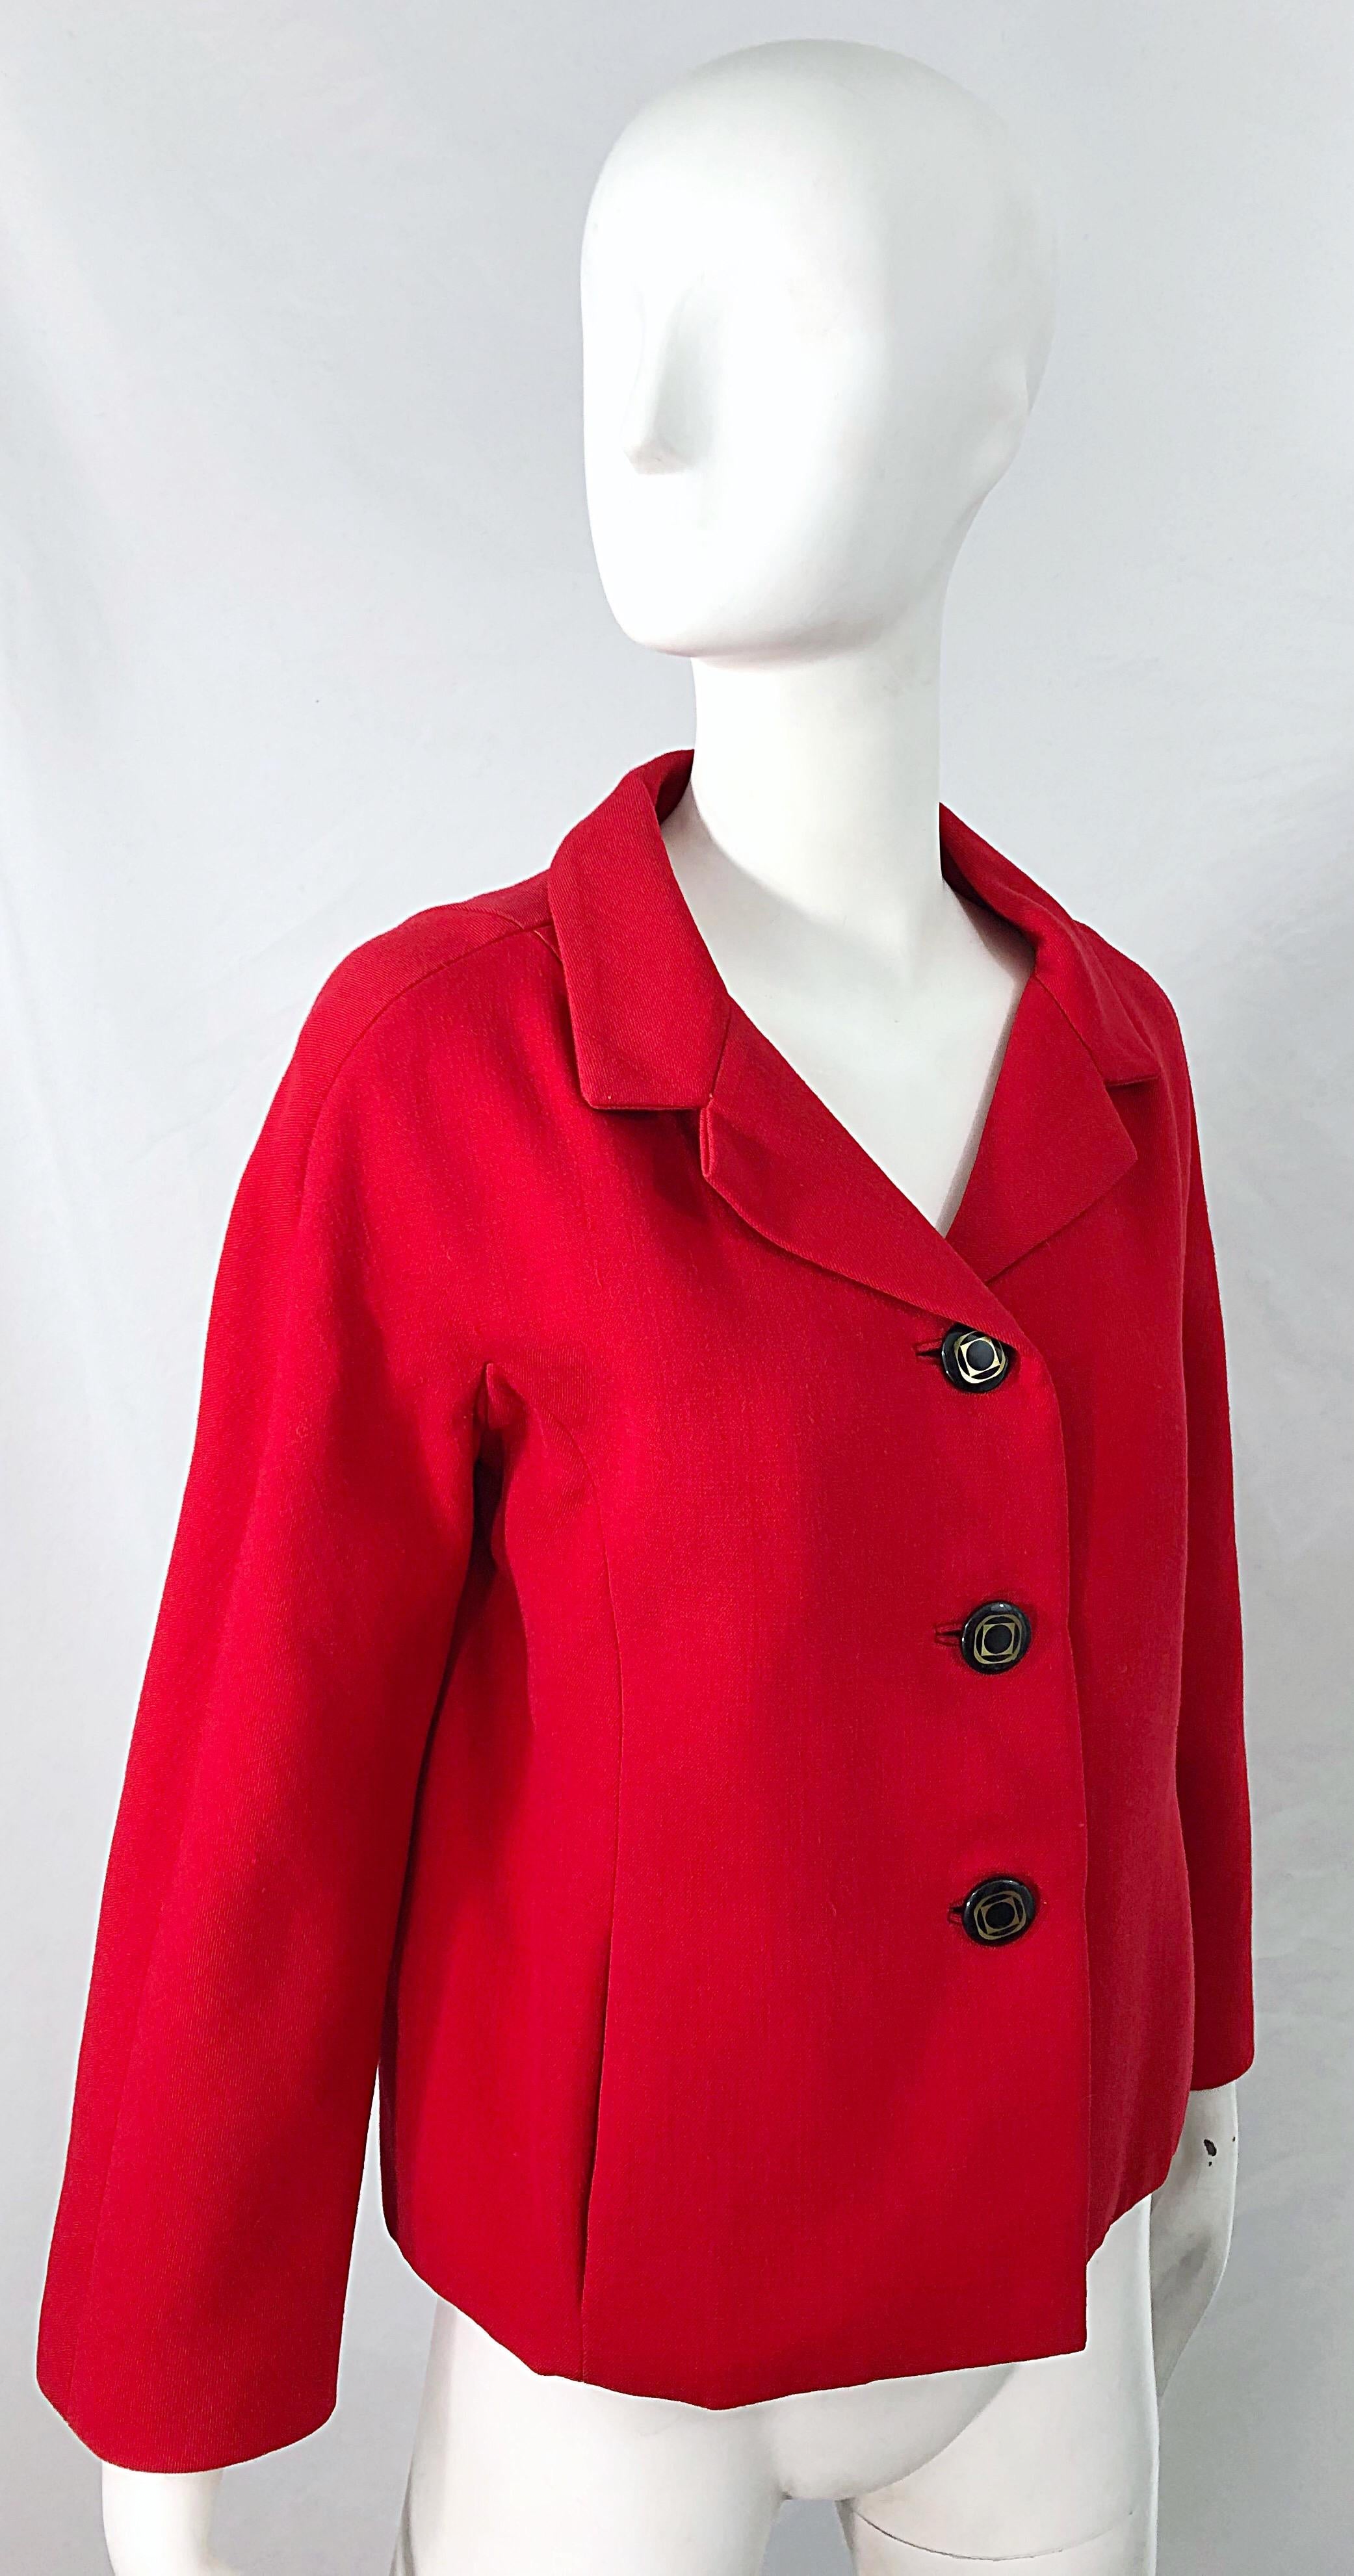 1960s Teal Traina Lipstick Red Mod Vintage Early 60s Wool Swing Jacket For Sale 7